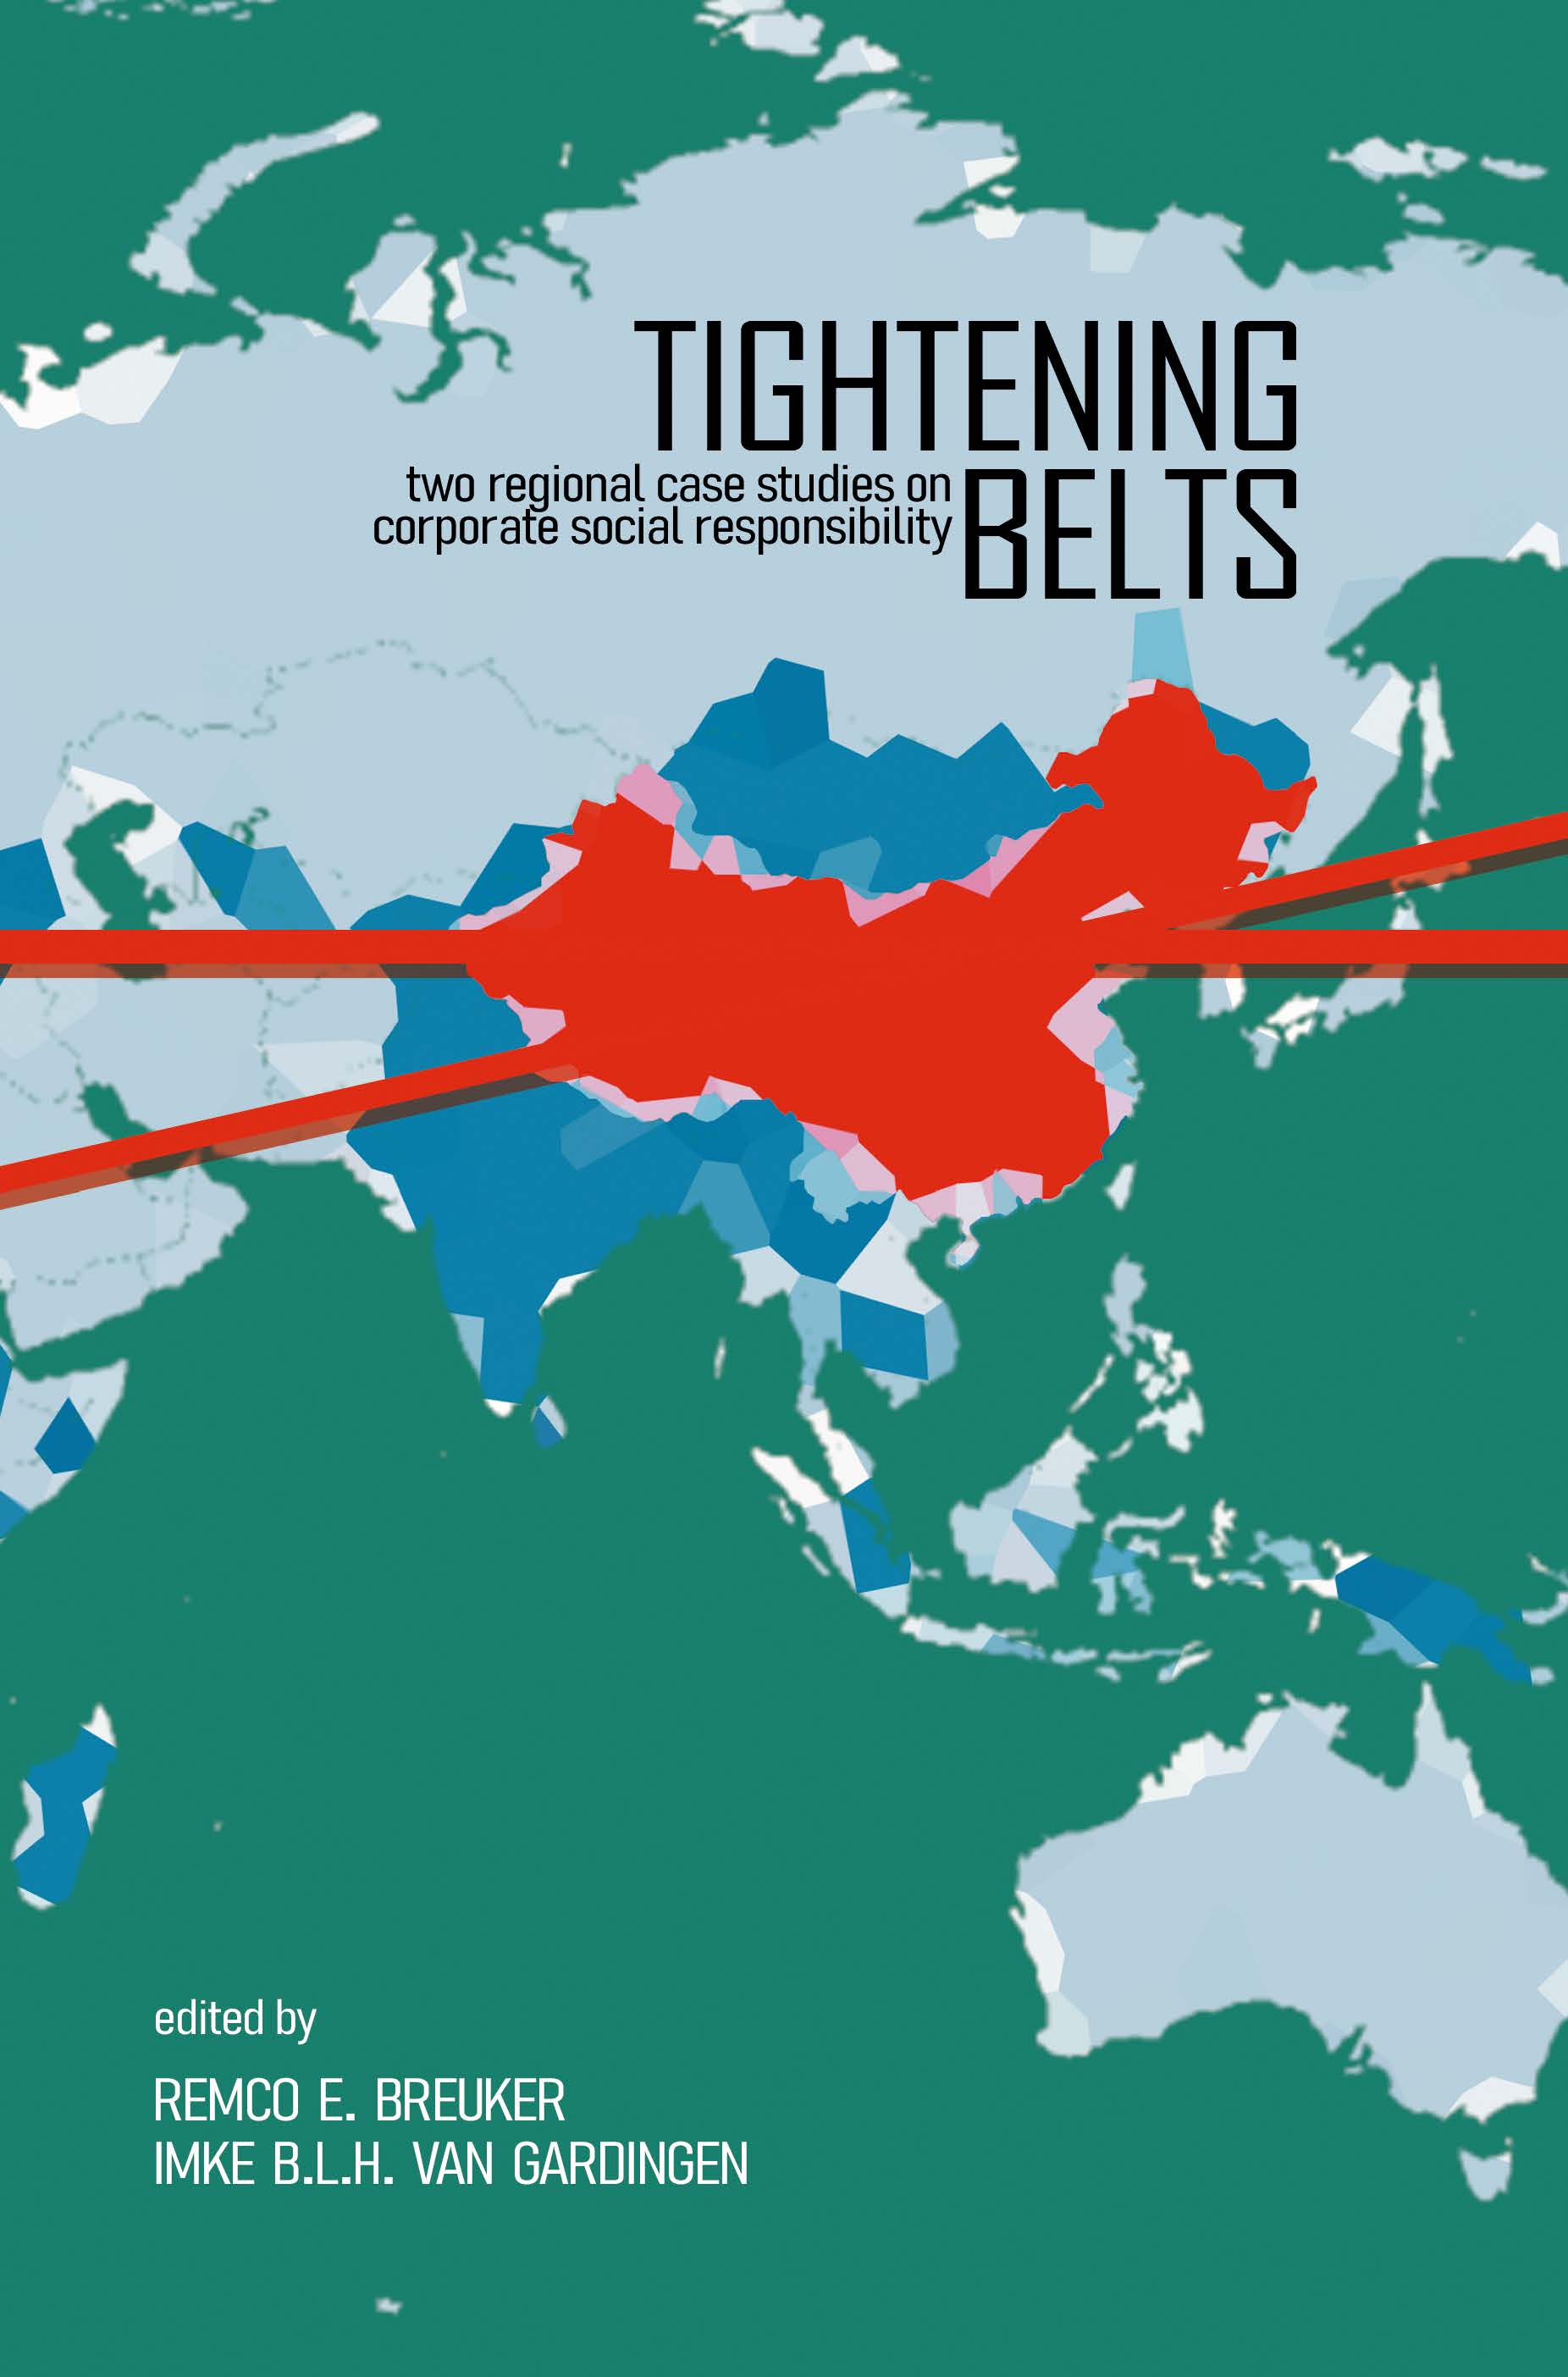 Tightening Belts - Two Regional Case Studies on Corporate Social Responsibility